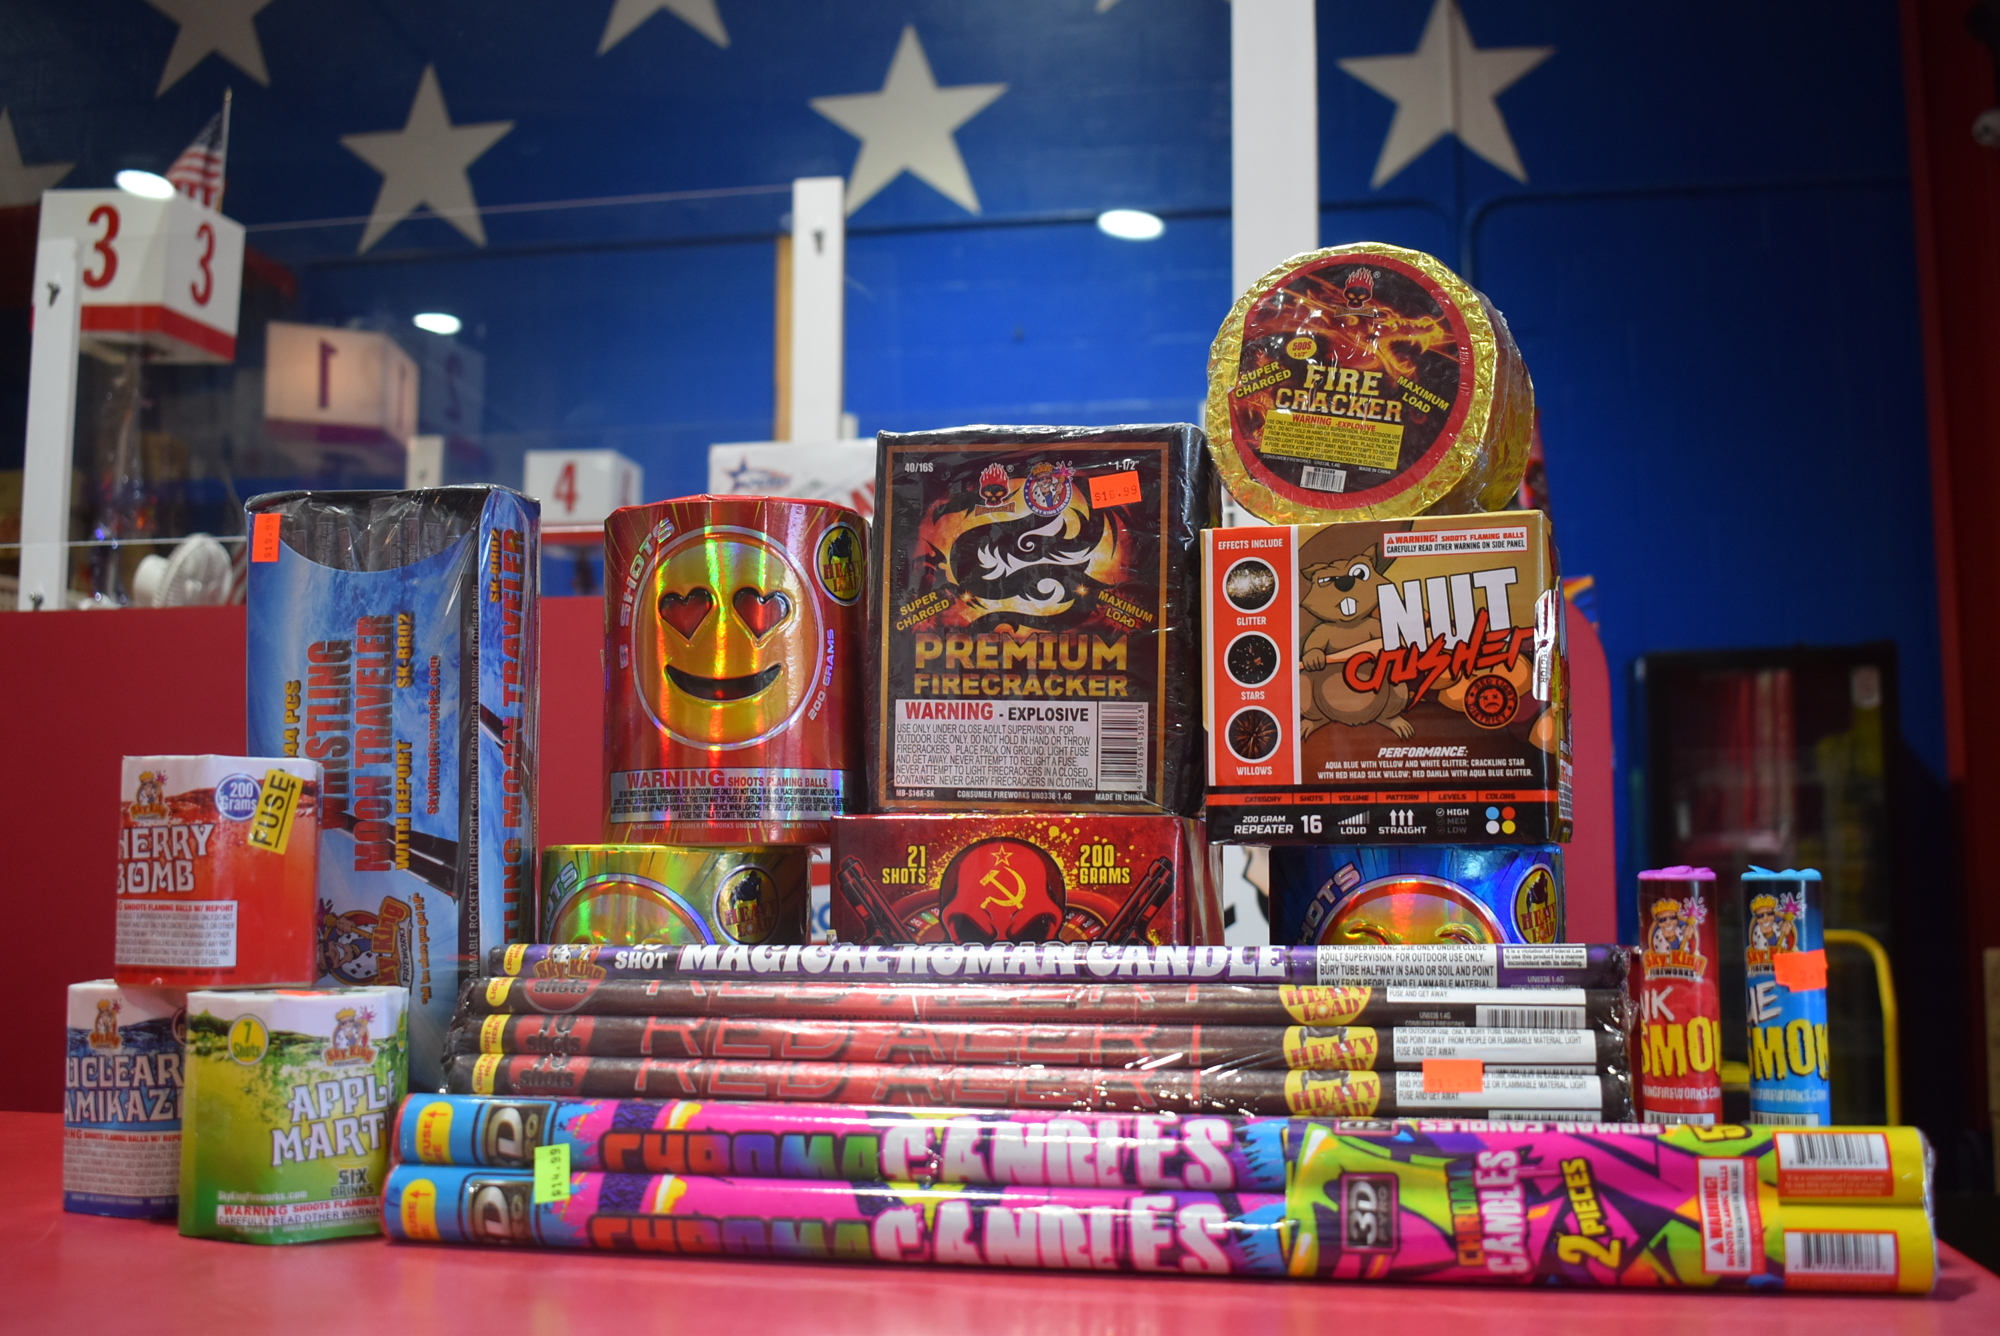 This combination of mortar shells and finale pieces would cost about $100, according to Sky King Fireworks Managing Partner Dustin Luer.